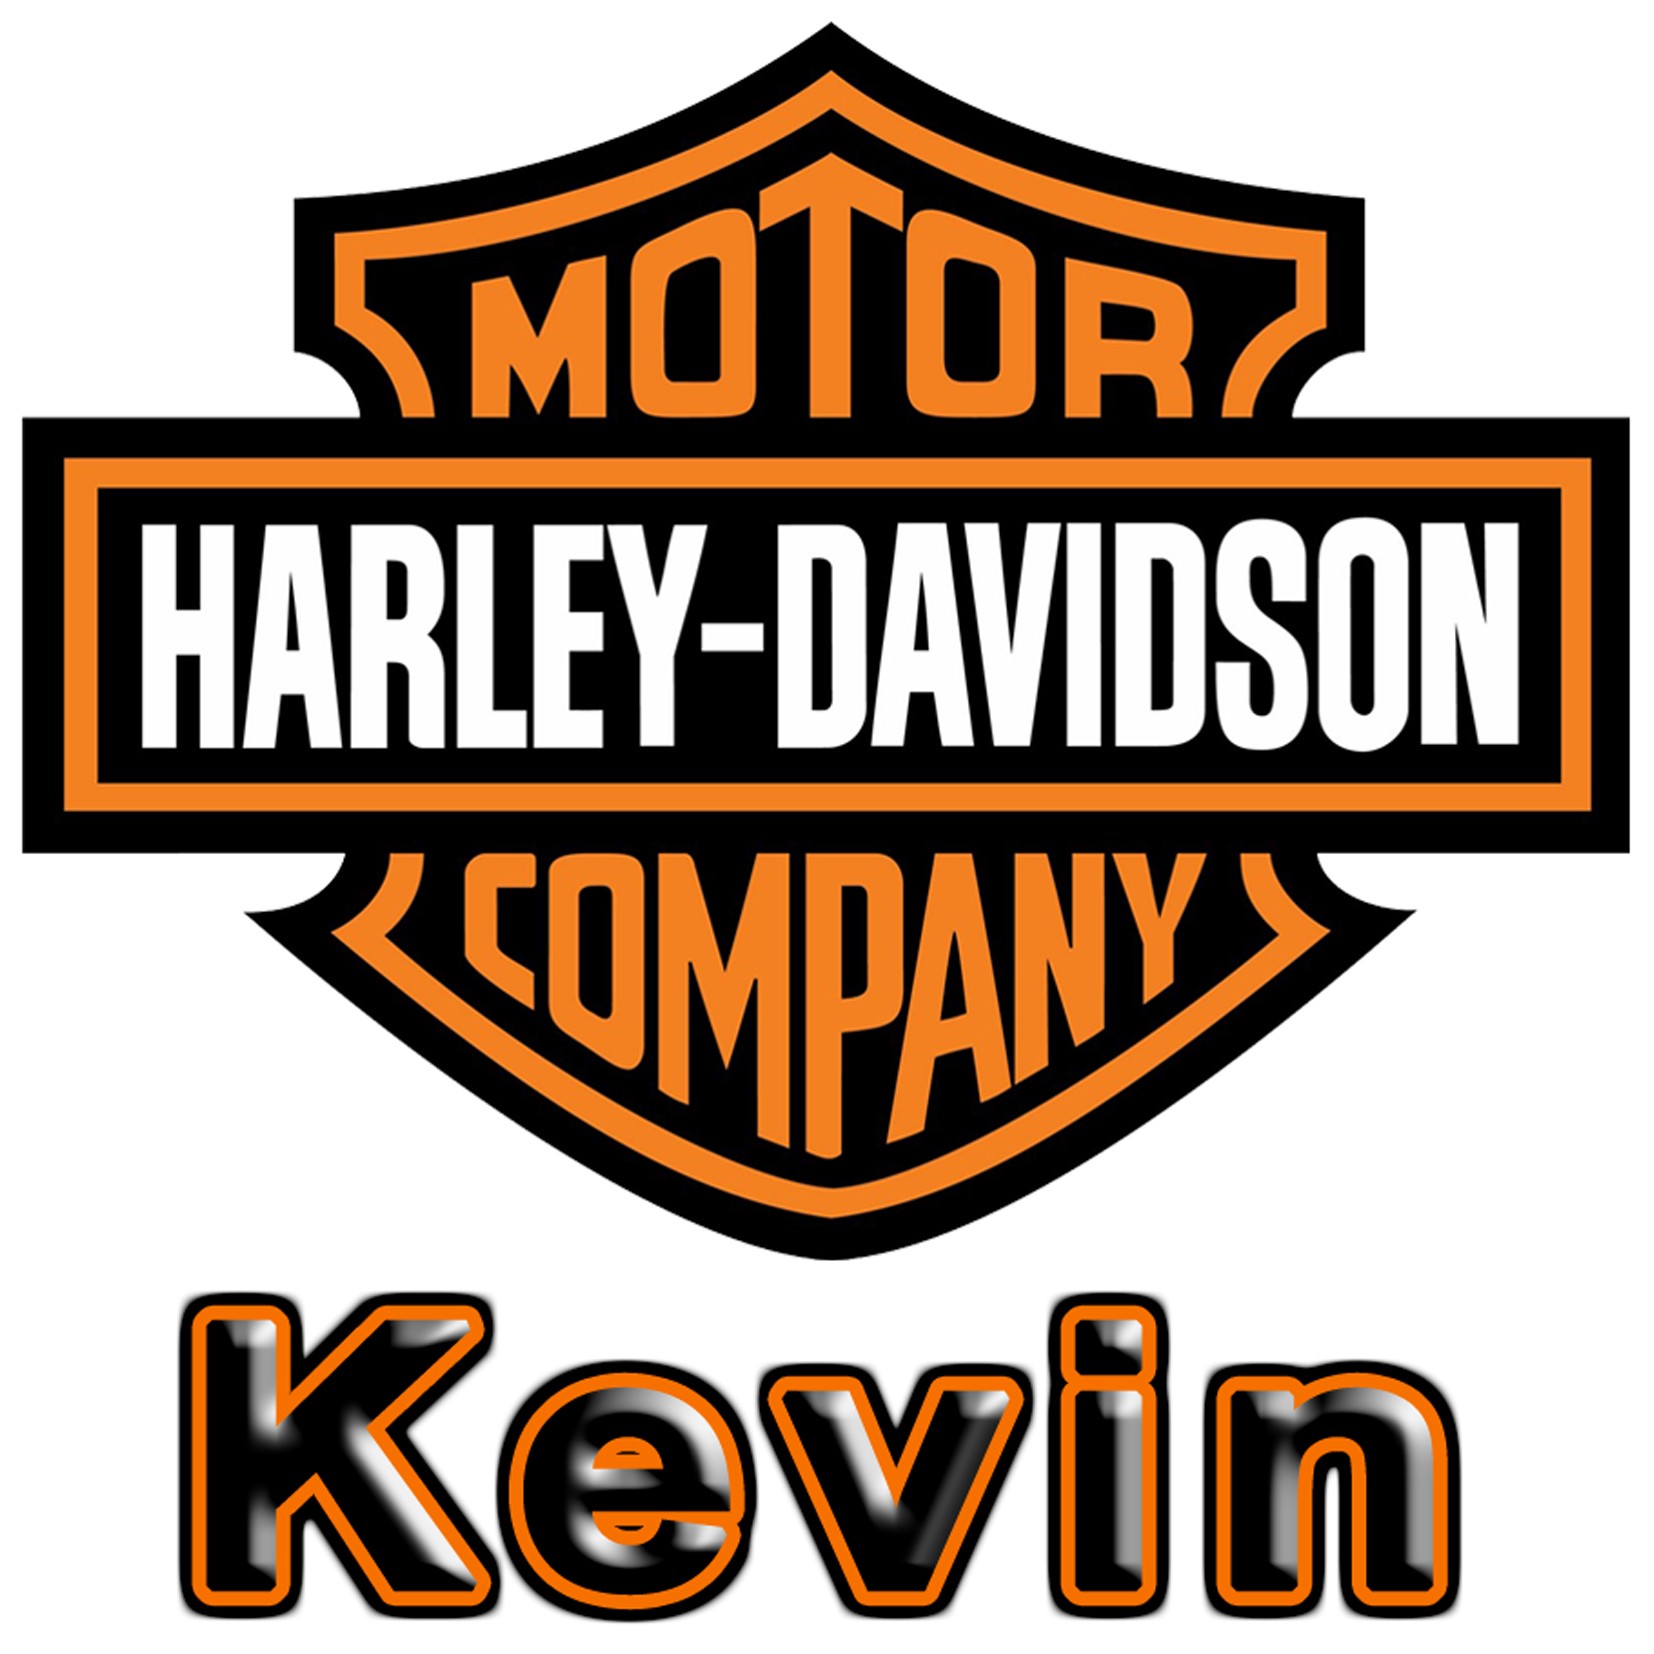 Personalized Harley Davidson Promotion Off57